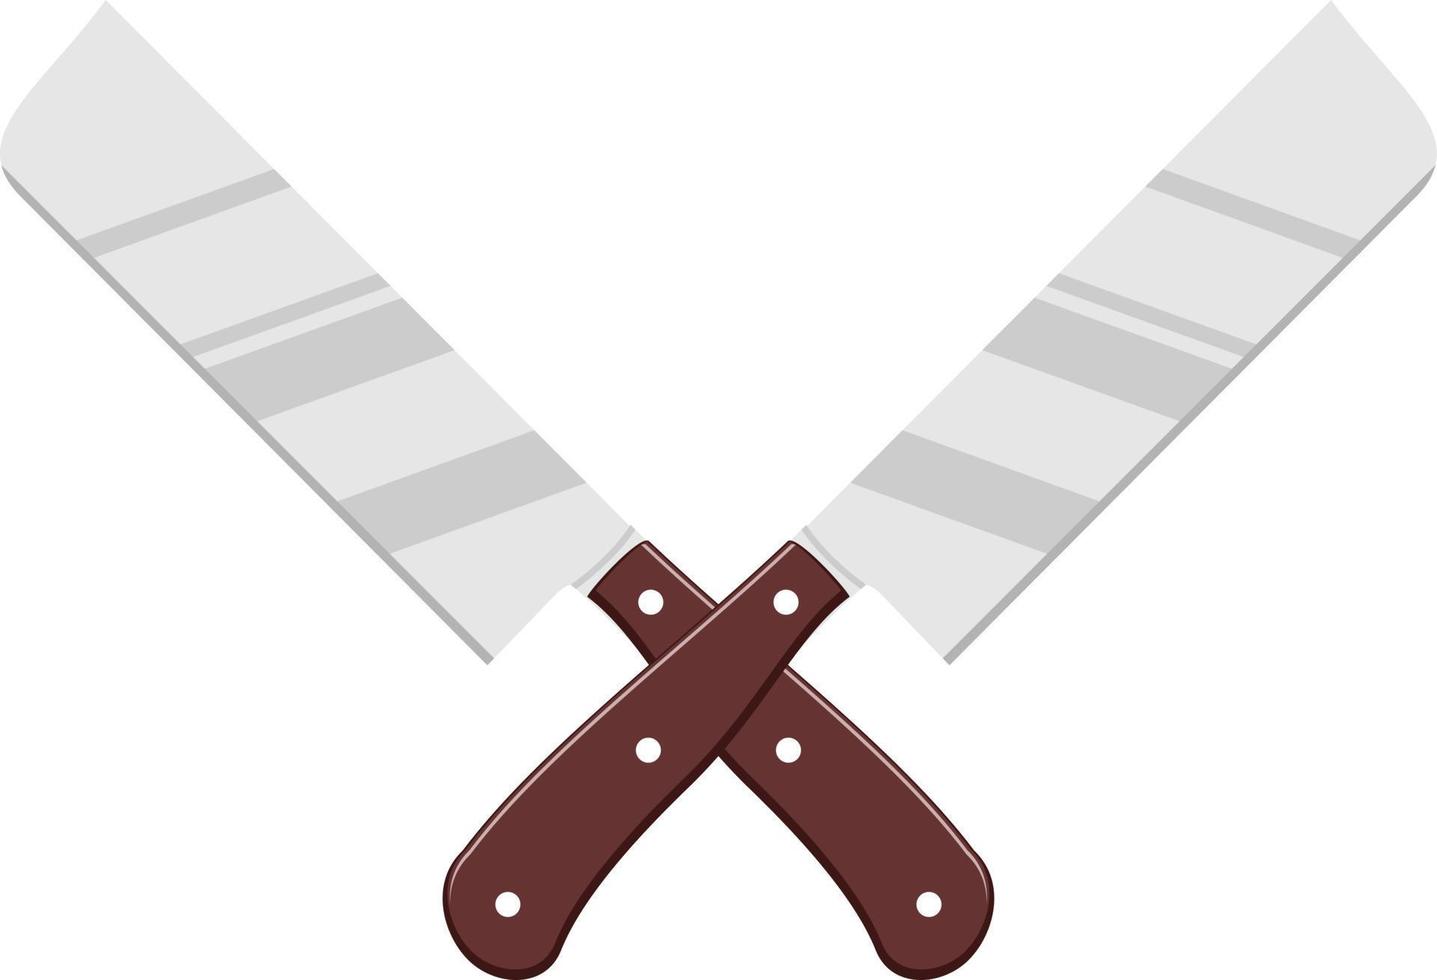 Crossed cleavers knives.  Vector illustration. Chopping kitchen tools cross icons, Cleaver knife stamping, lumberjack and butcher cooking logo graphics